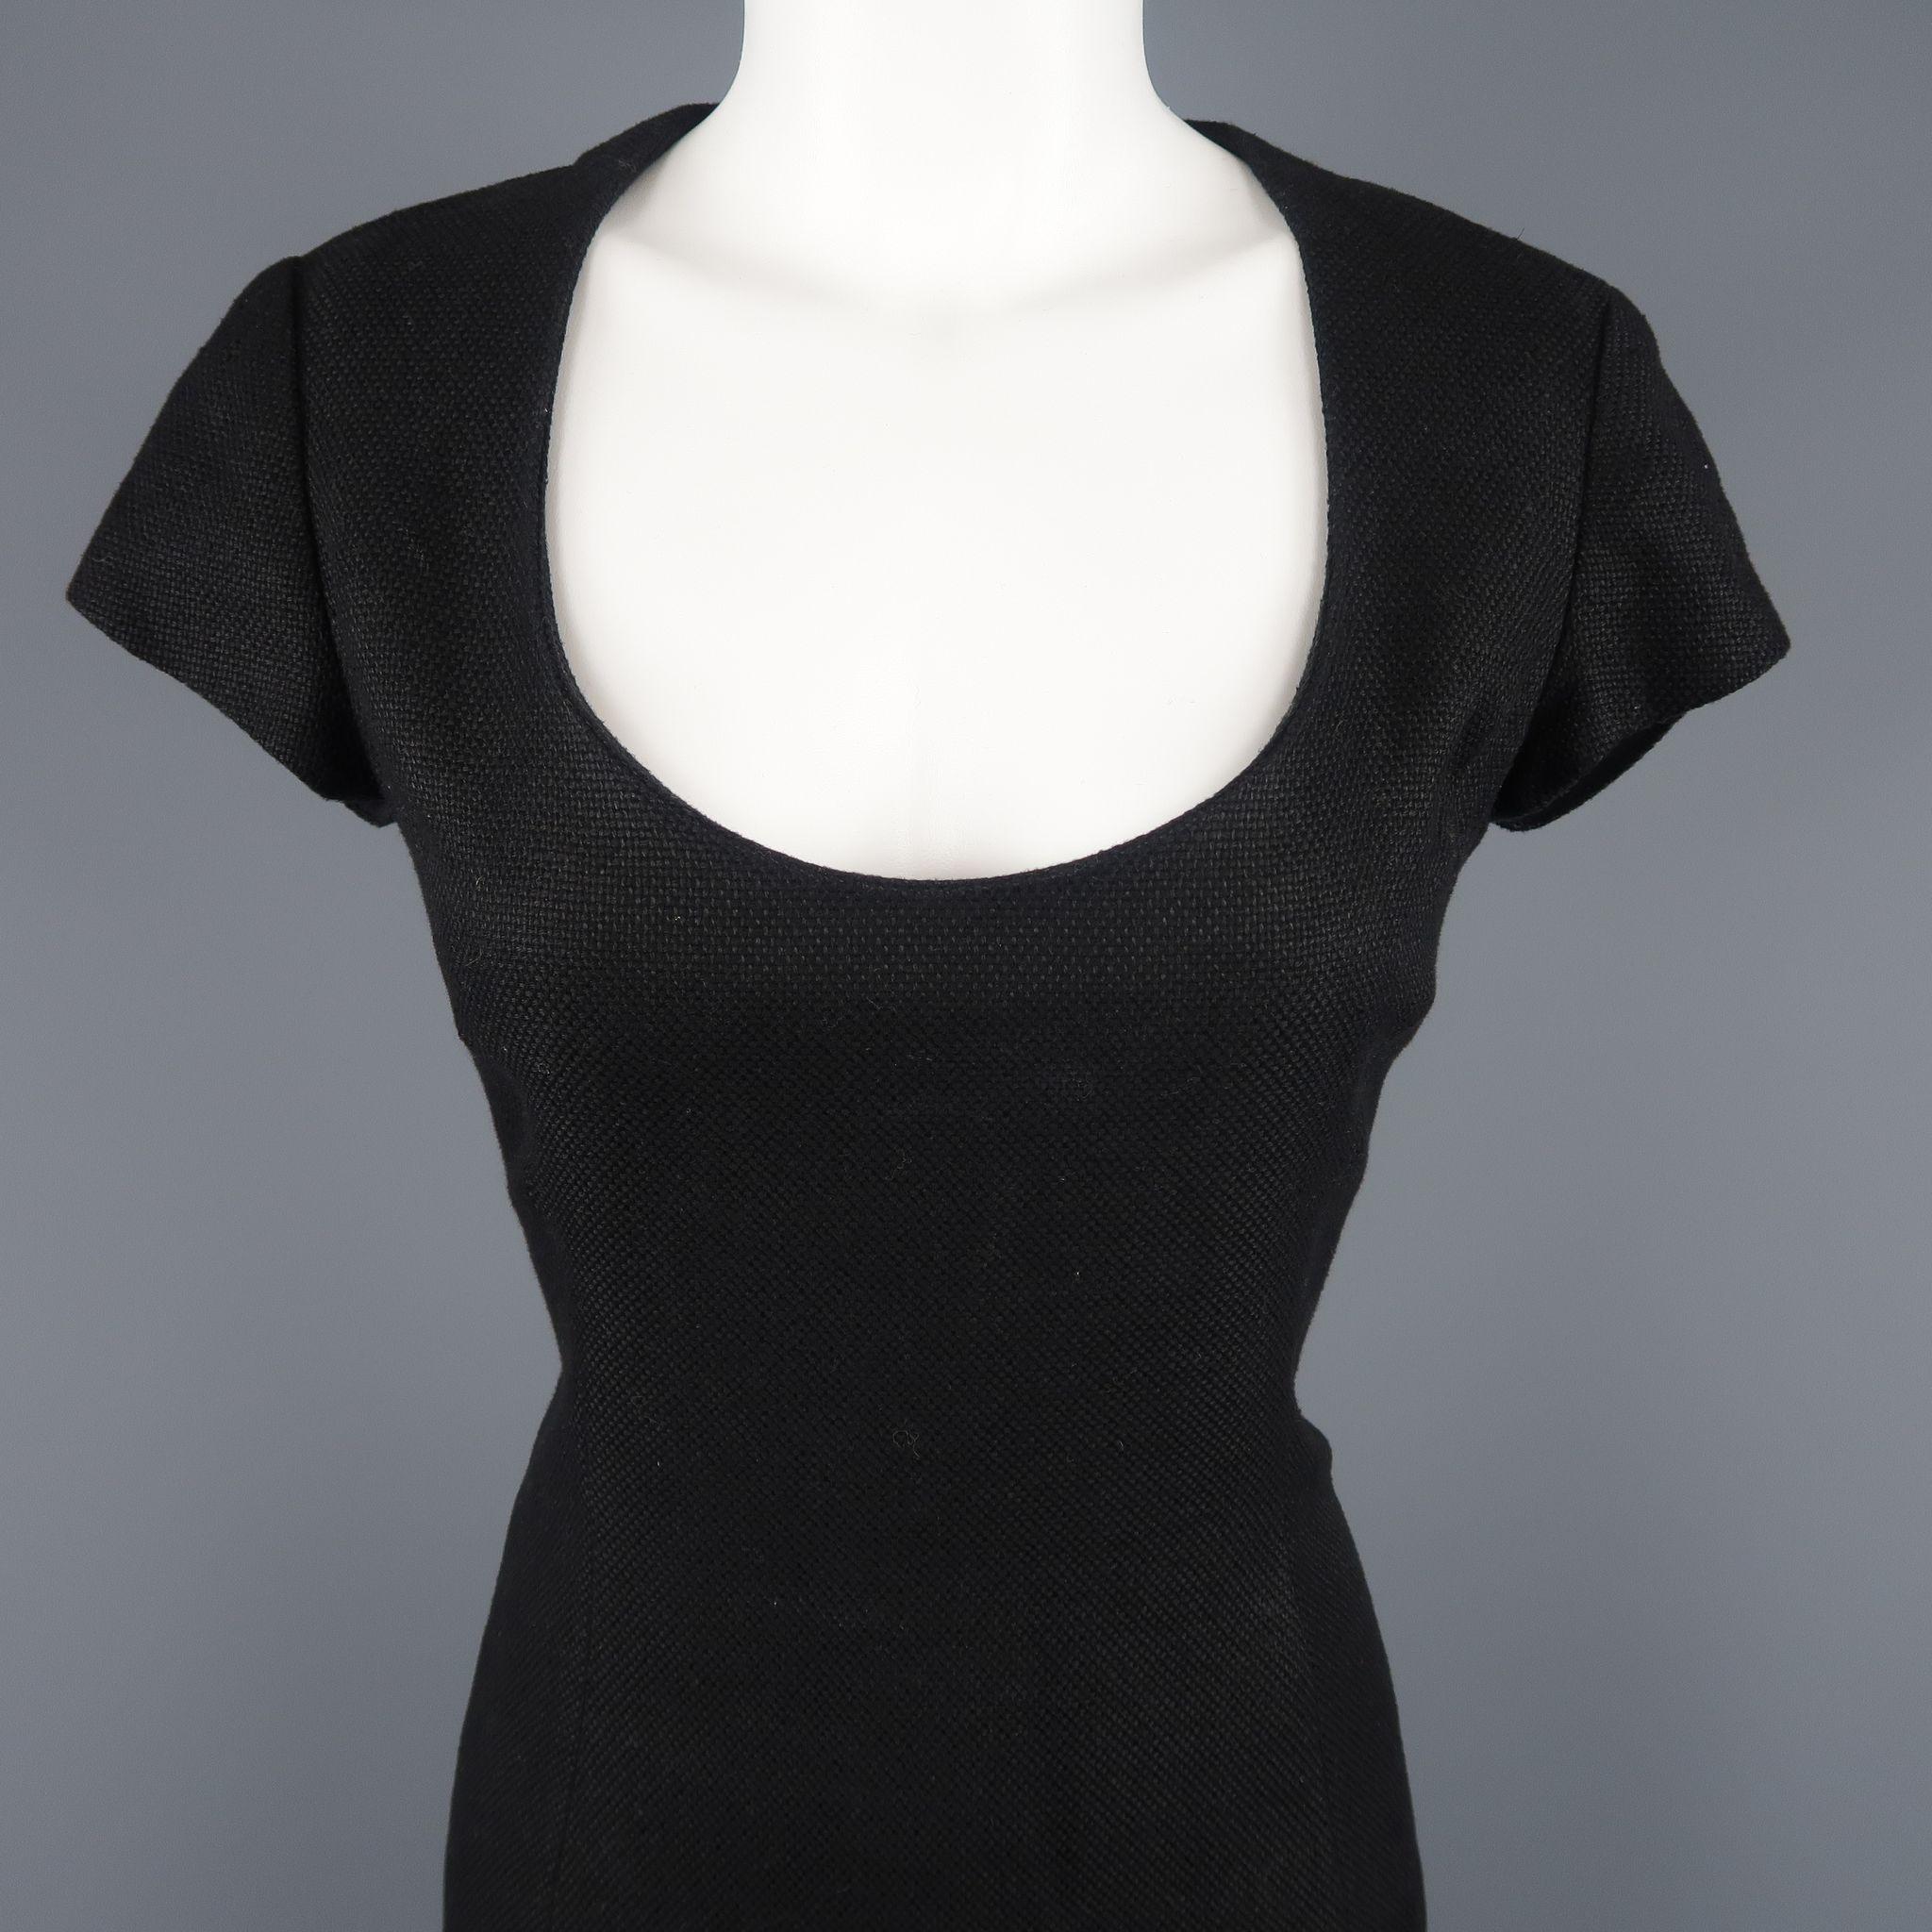 RALPH LAUREN COLLECTION dress comes in black woven linen fabric with a scoop neck, cap sleeves, and sheath silhouette. Made in USA.  RETAILED AT $1990
 
Good Pre-Owned Condition.
Marked: 8
 
Measurements:
 
Shoulder: 15 in.
Bust: 36 in.
Waist: 32